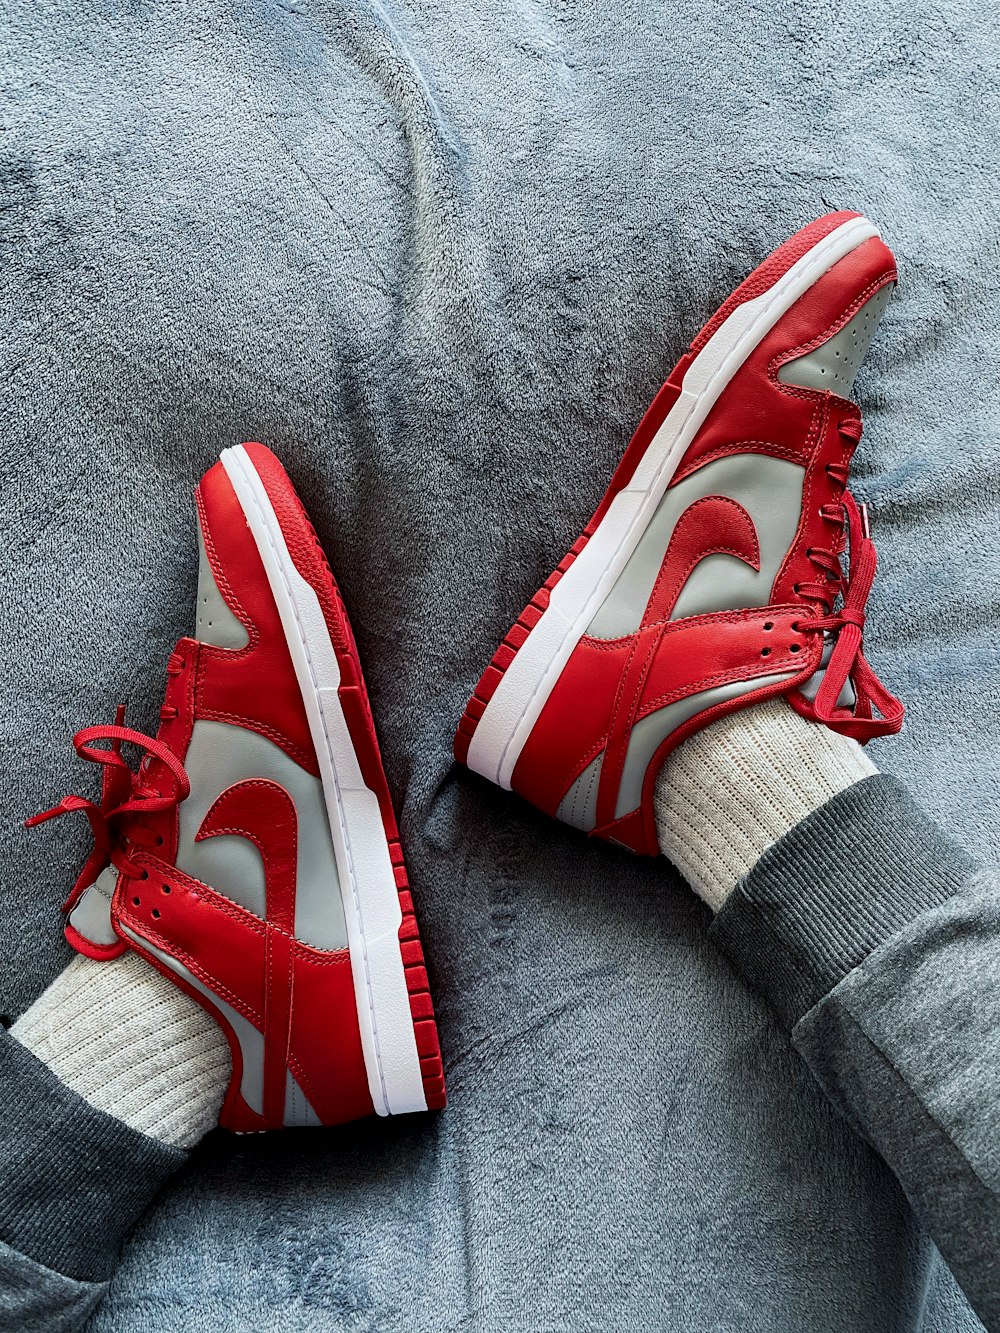 Black white and red nike sneakers photo – Free Sneaker Image on Unsplash